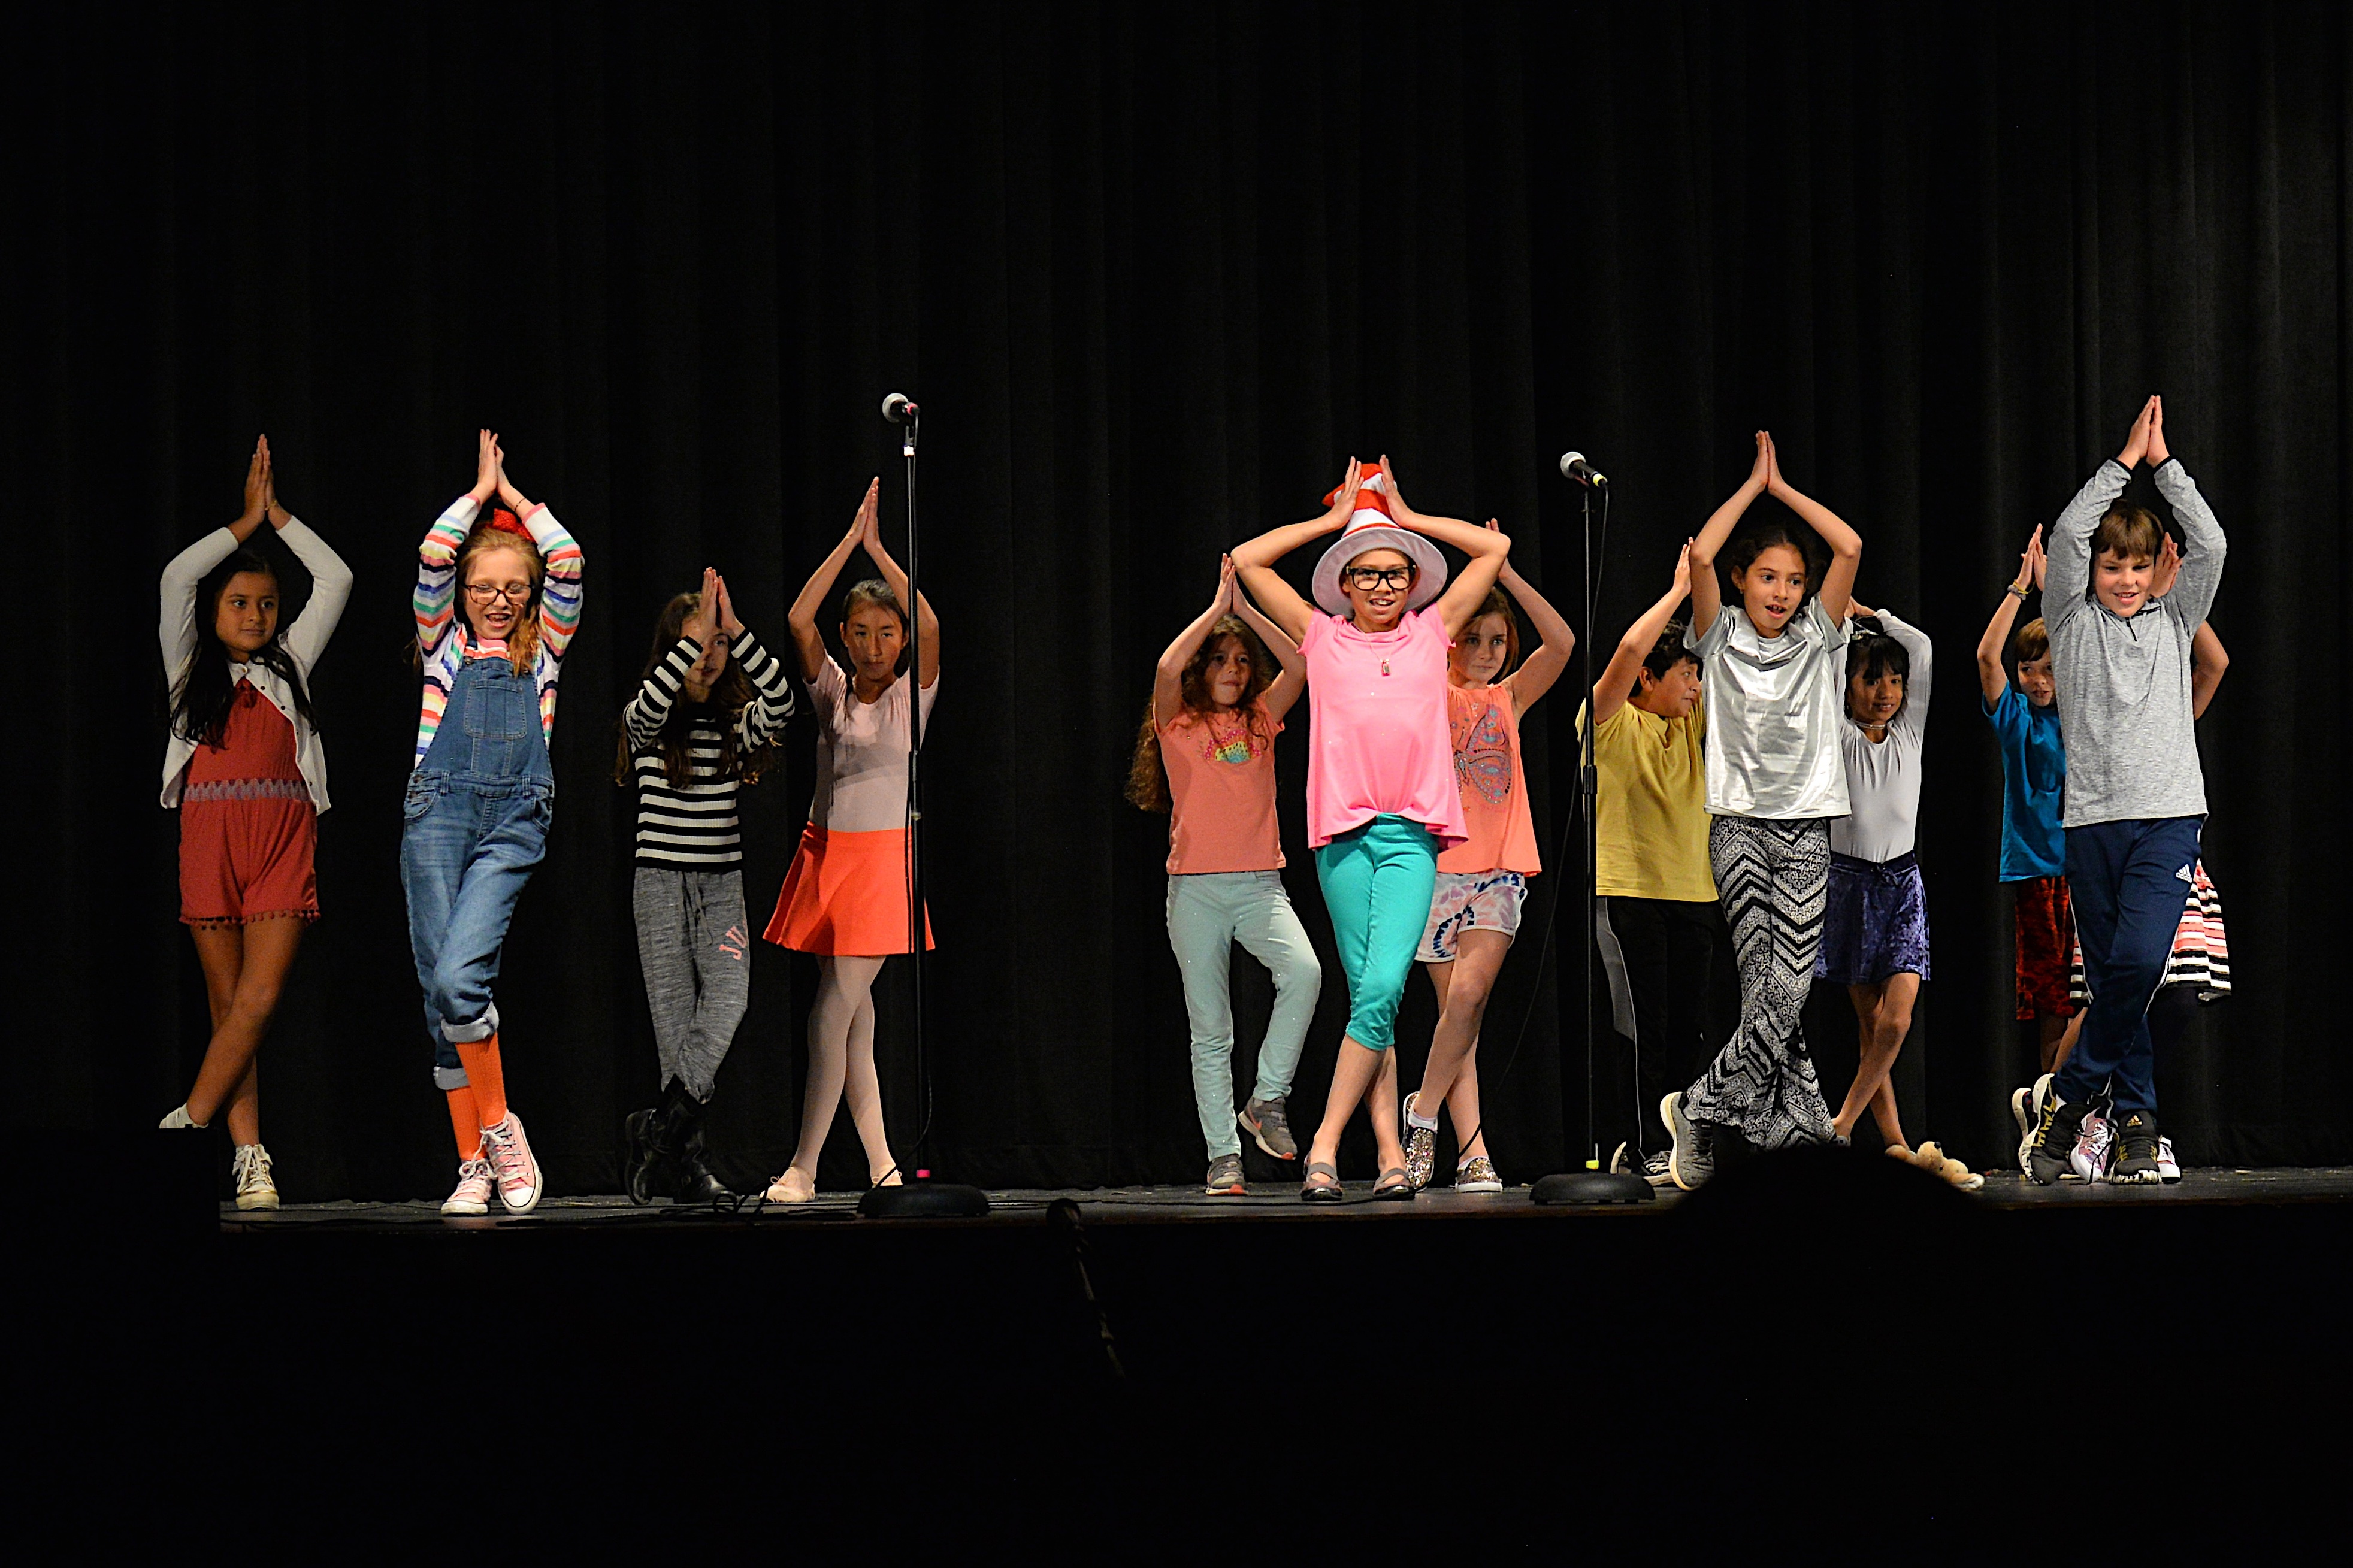 East Hampton High School students were the performers in the Bonac Broadway Bistro event on Friday at the high school. It raised money for the district's arts programs.